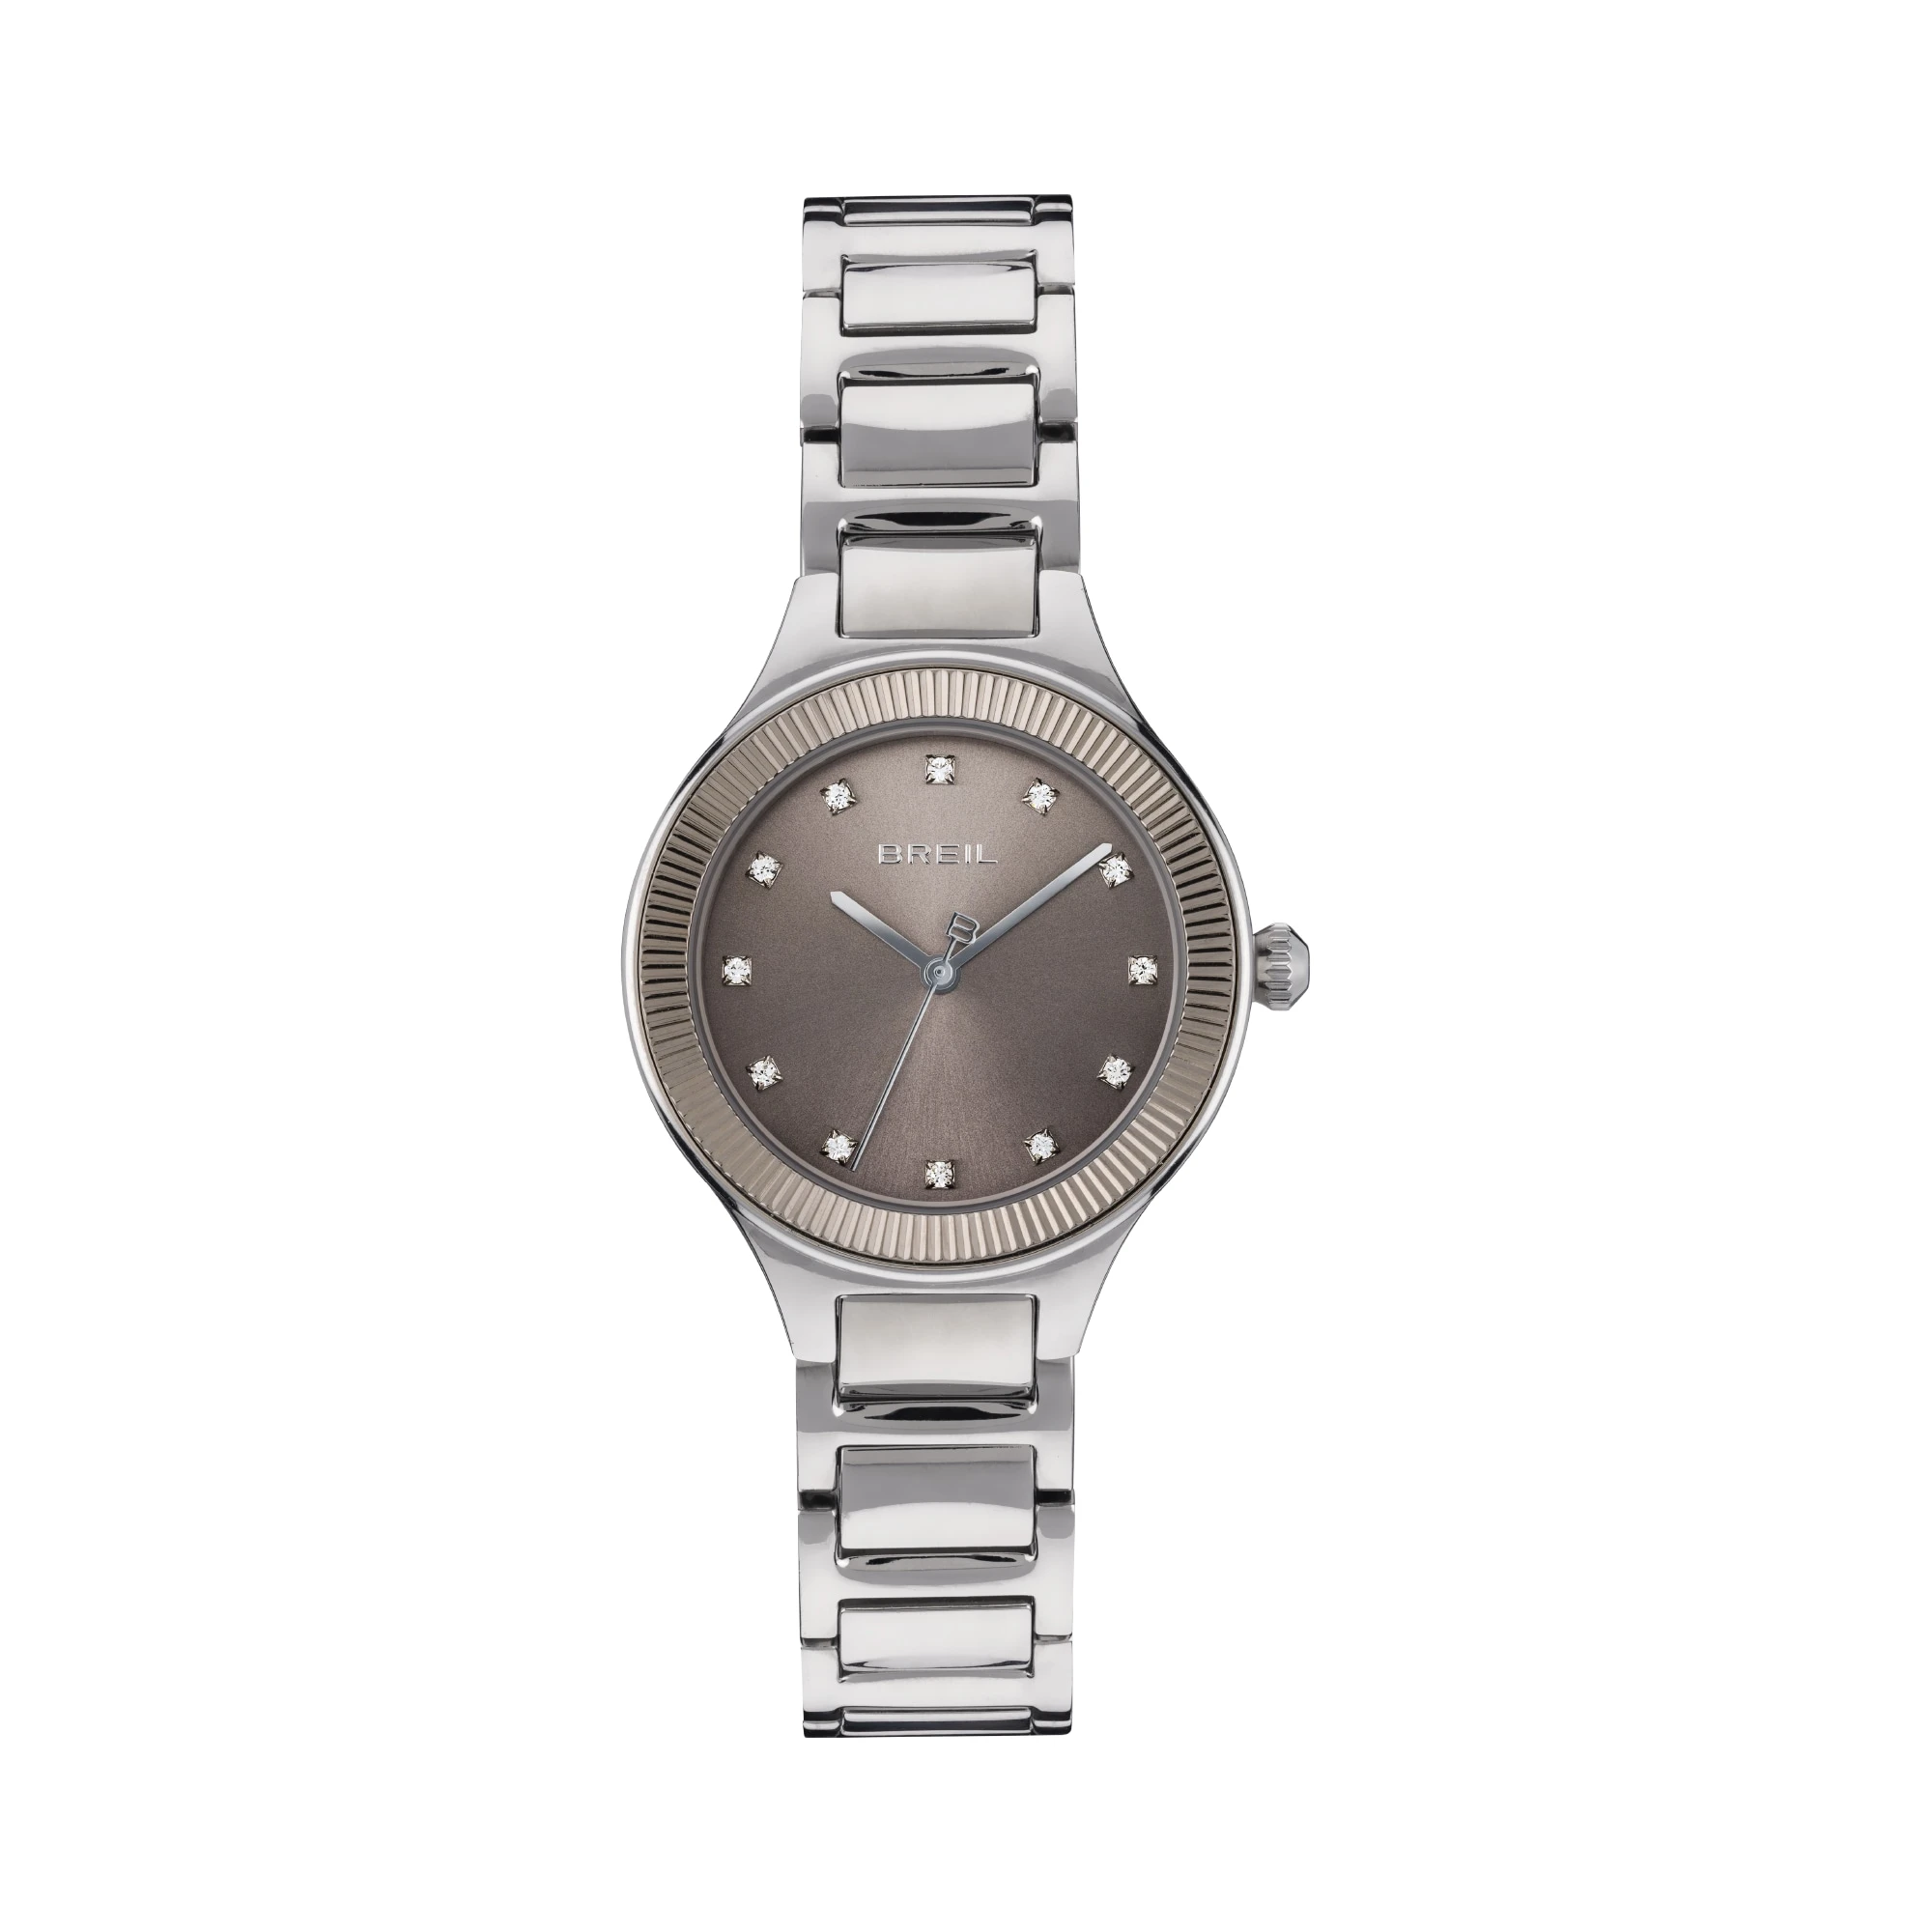 SHEER - SOLO TEMPO LADY 32 MM - 1 - TW1996 | Breil